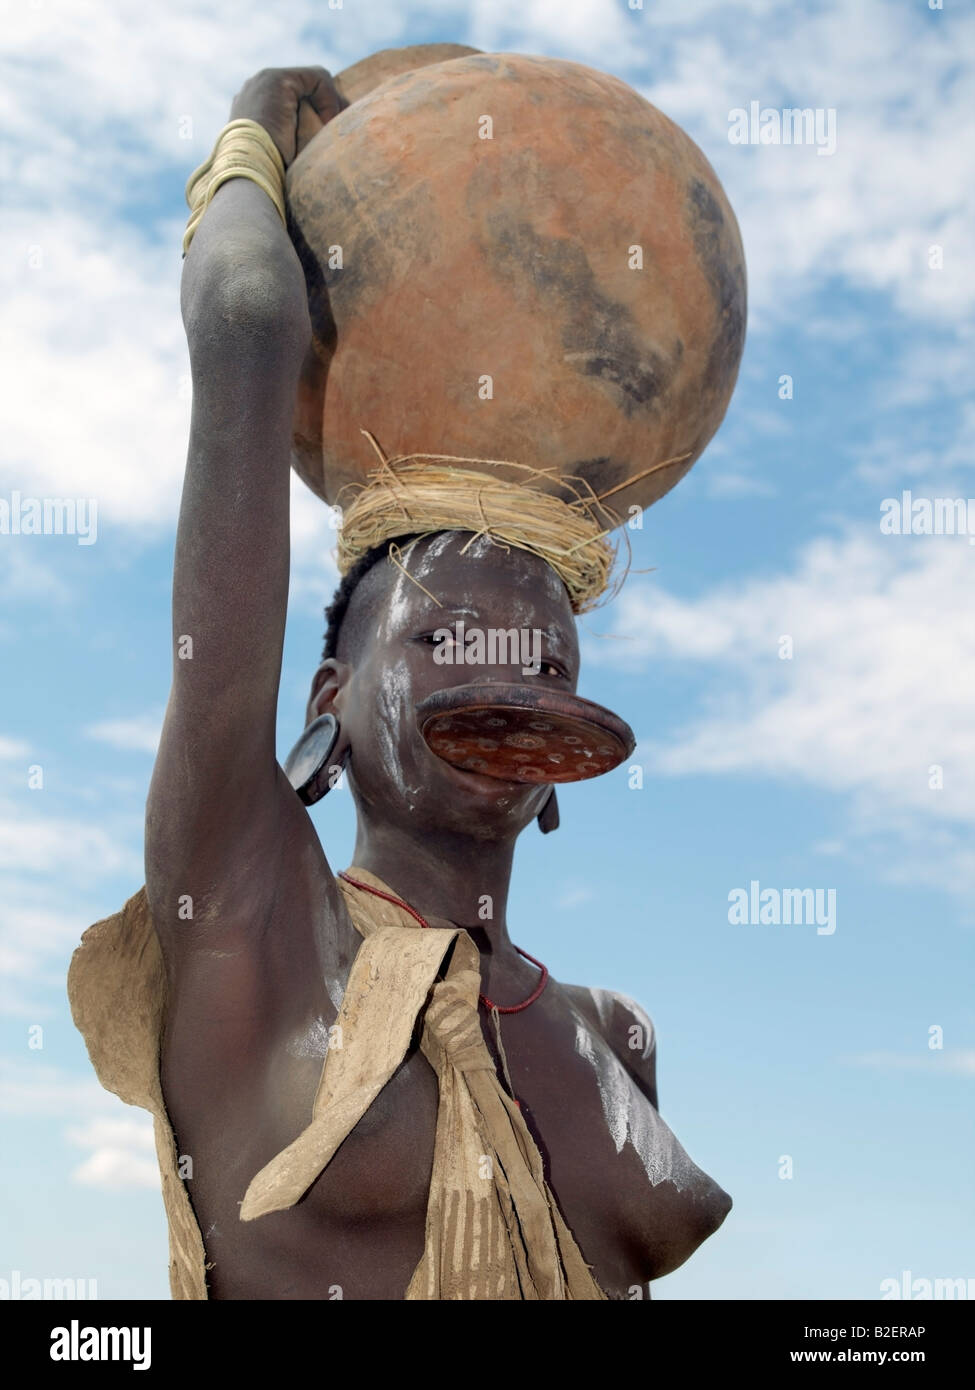 A Mursi woman wearing a large clay lip plate and ear ornaments to match carries a large clay pot on her head. Stock Photo